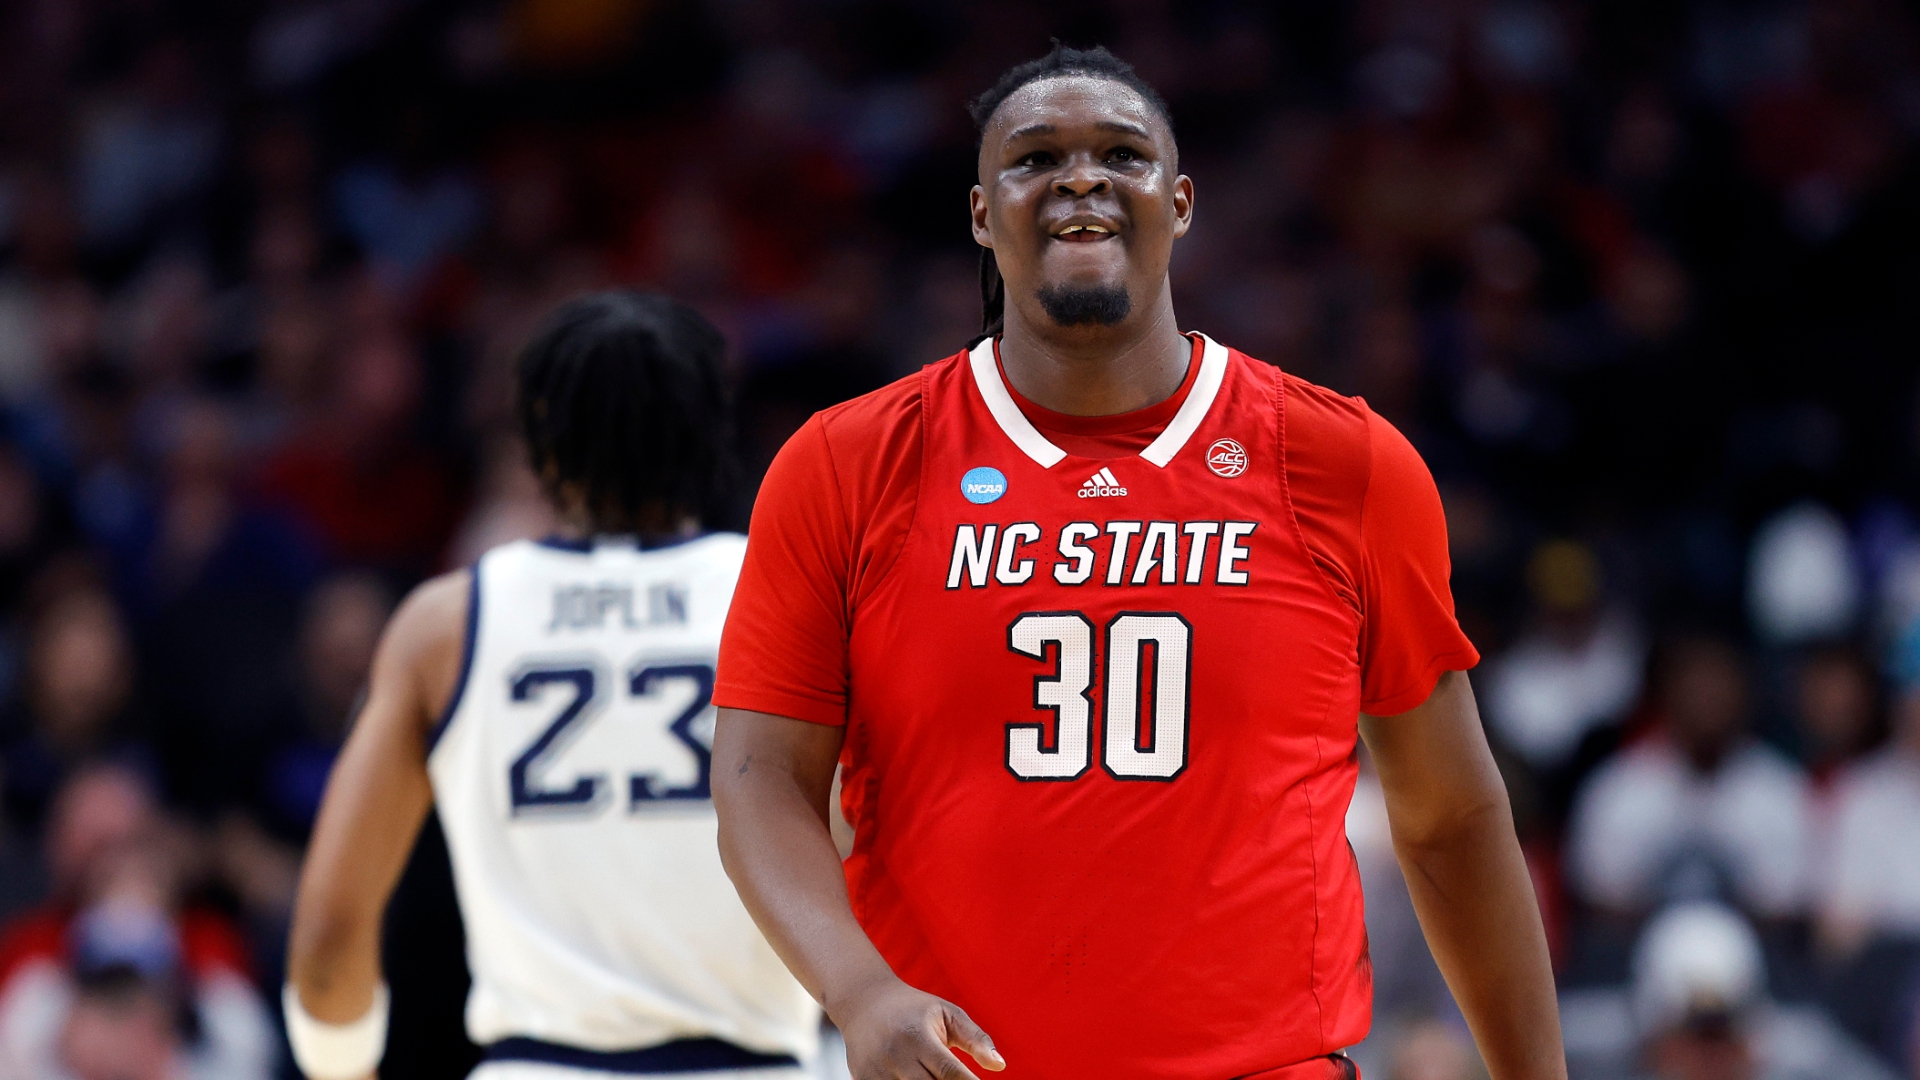 DJ Burns finishes crafty up-and-under layup for NC State